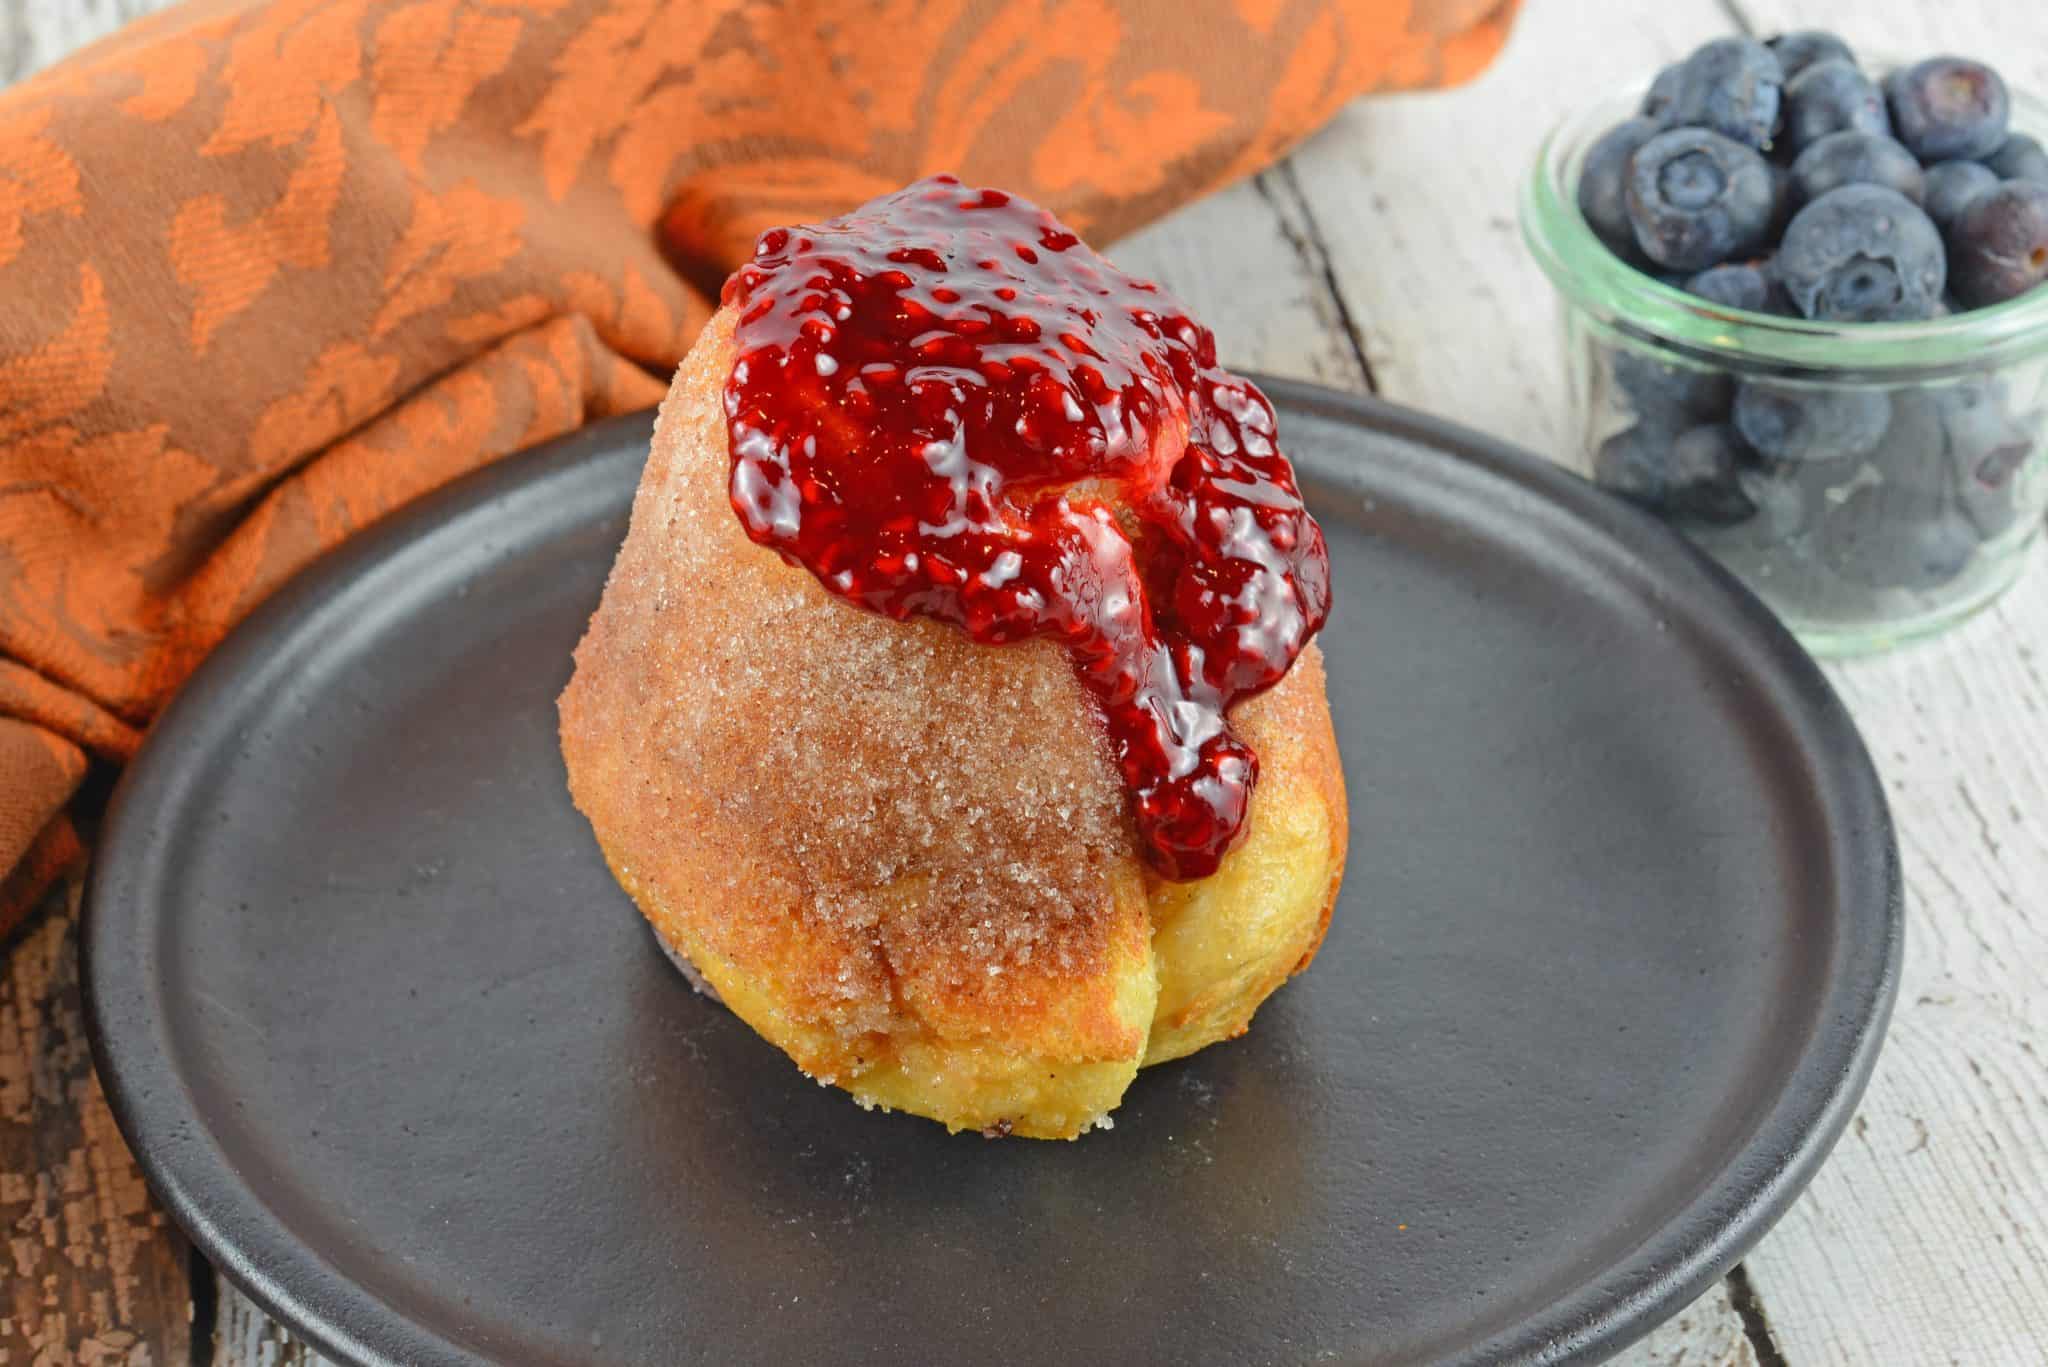 Cinnamon Sugar Popovers are easier to make then you think! A crispy outside and chewy inside coated with cinnamon and sugar, then drizzled in a fresh raspberry sauce.